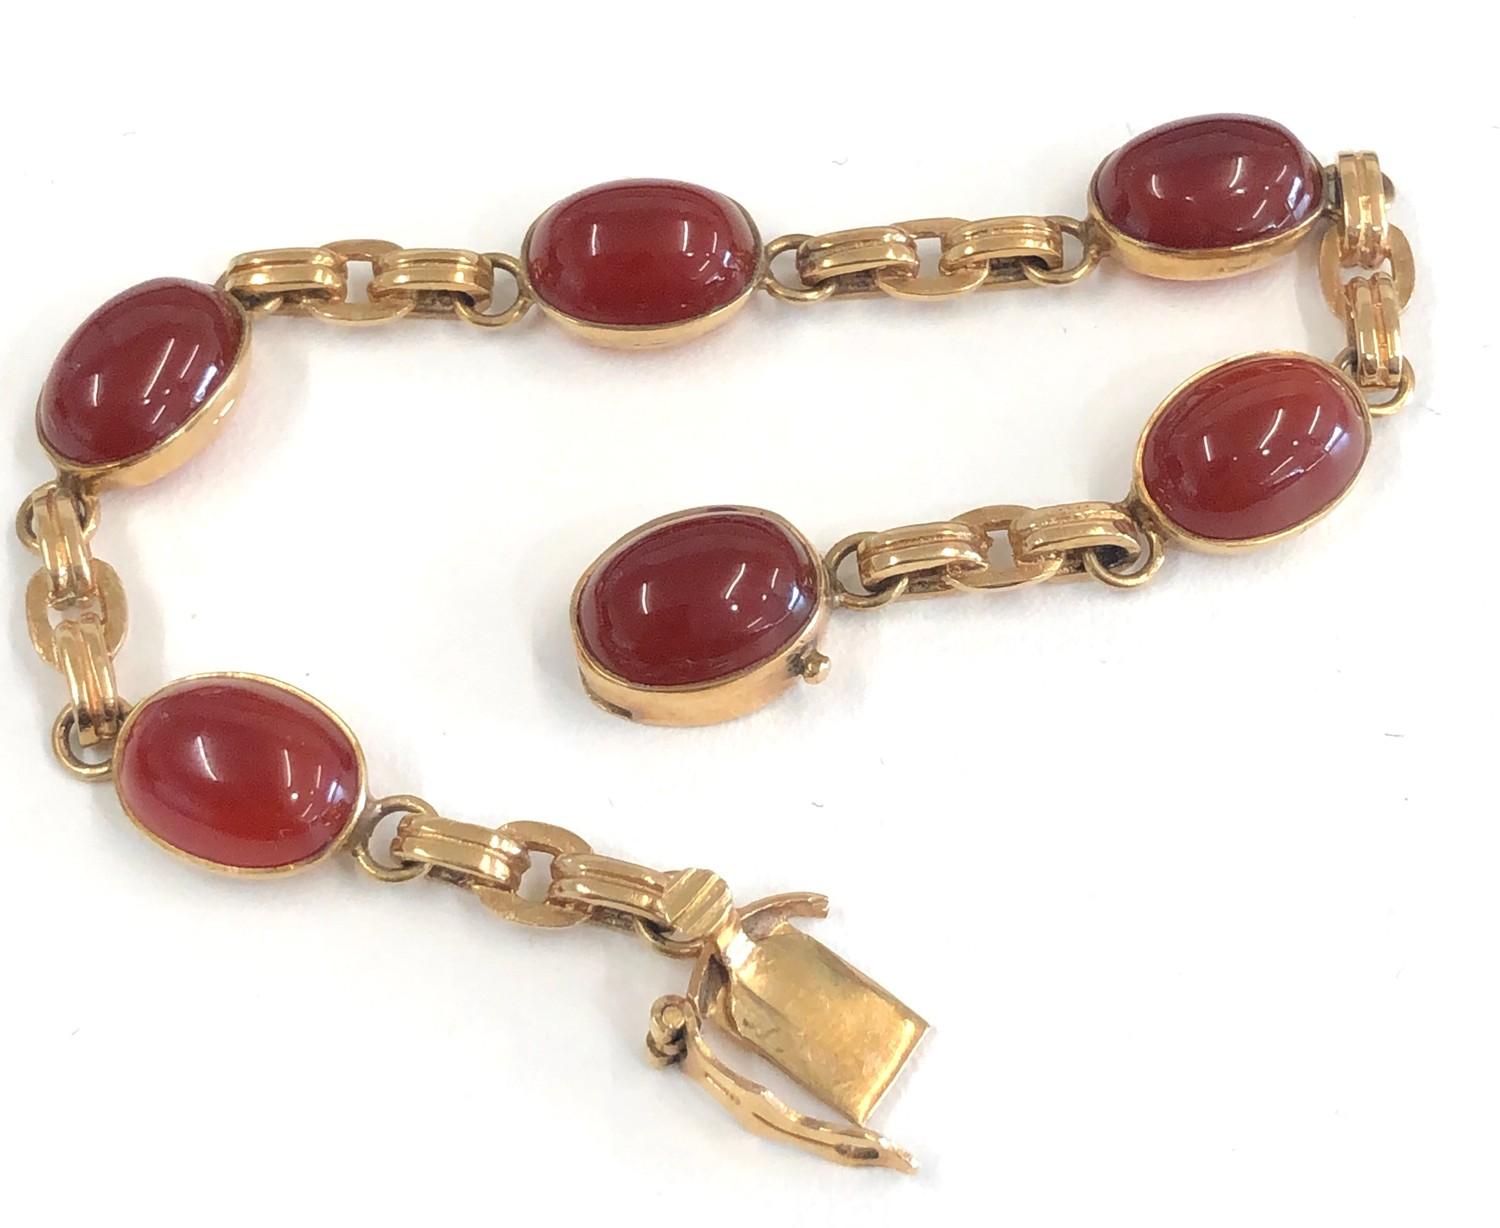 Vintage 9ct gold and cornelian set bracelet measures approx 19cm long weight 14.91g hallmarked 9.375 - Image 4 of 4